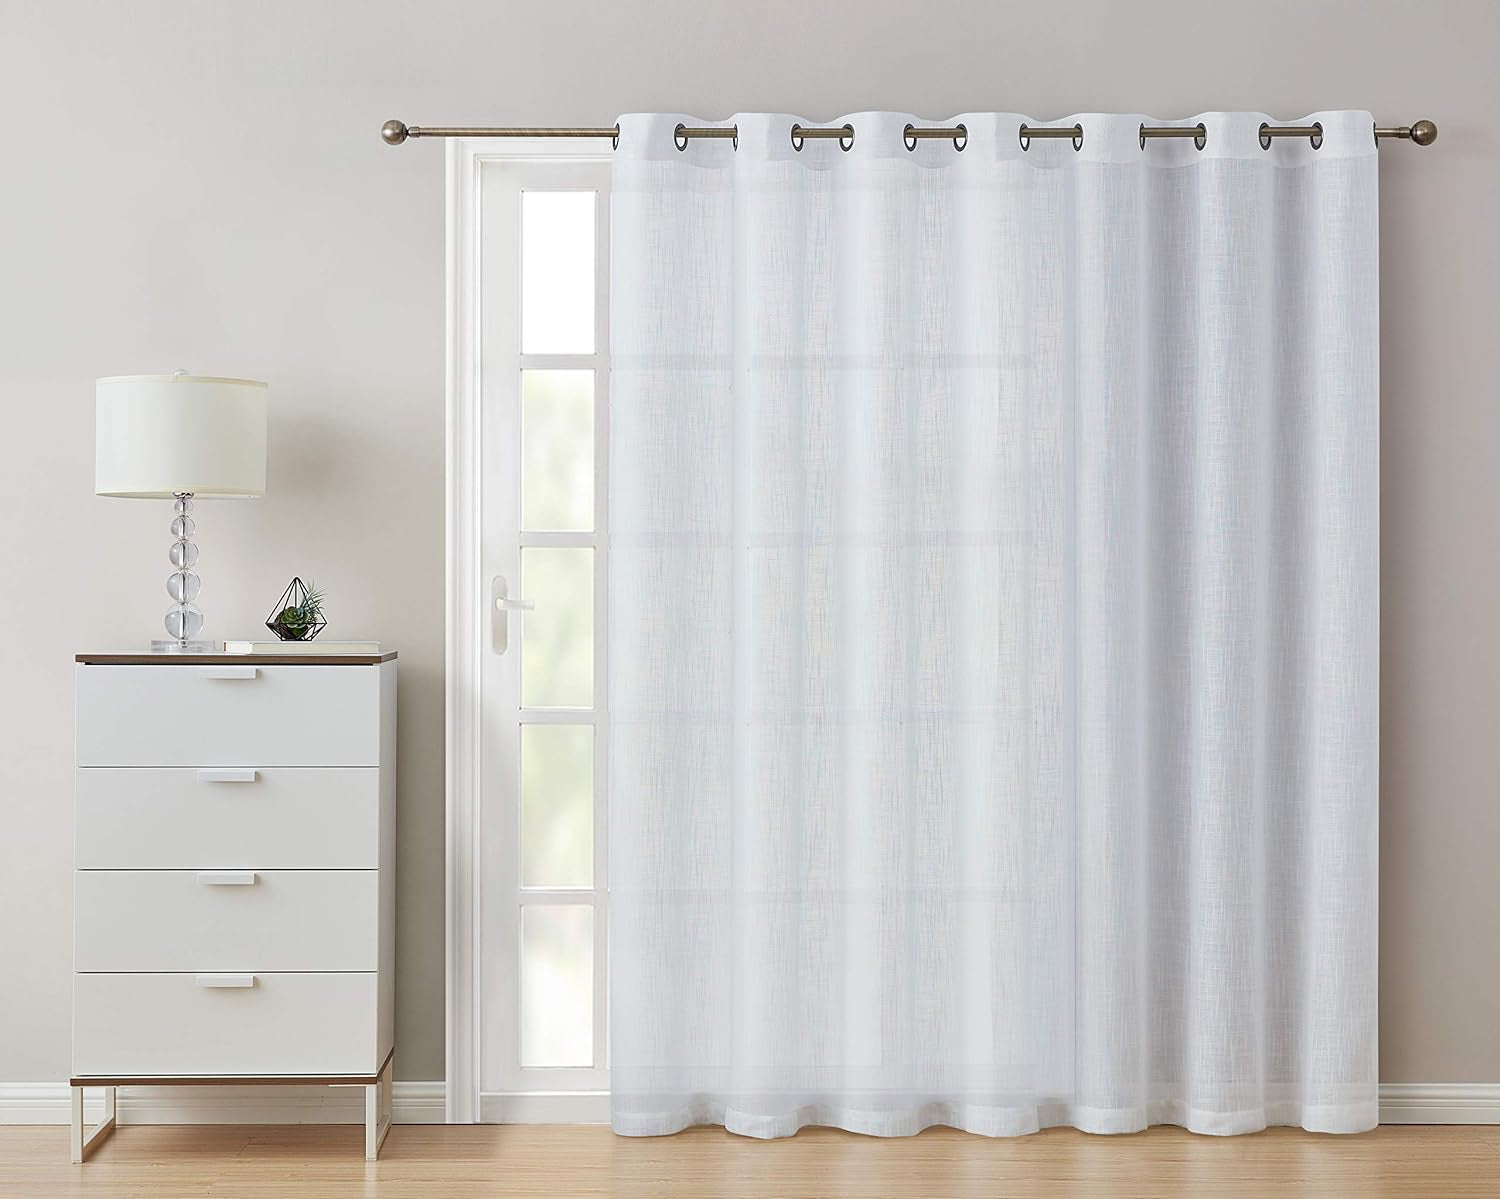 HLC.ME Faux Linen Semi Sheer Extra Wide Light Filtering Patio Door Grommet Curtain Panel for Sliding Glass Doors - White - 100 W X 84 Inch Long  HLC.ME   